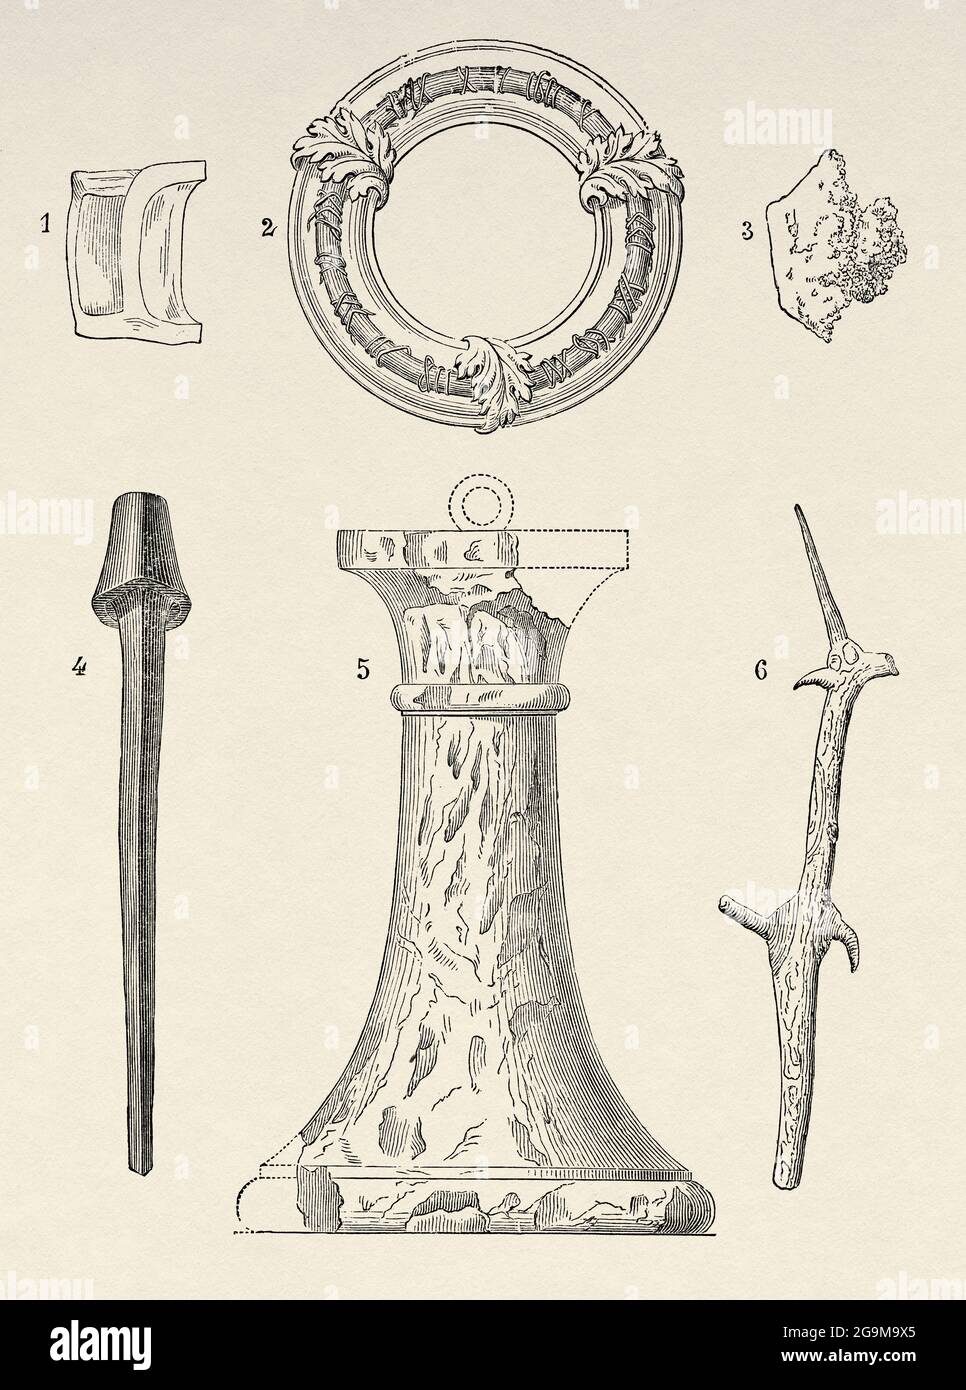 Instruments of the passion of Jesus Christ. 1 Relic of the reed, 2 Crown of thorns, 3 Remnants of the sponge, 4 A nail, 5 The column of the scourging, 6 A thorn of the crown. Old 19th century engraved illustration from Jesus Christ by Veuillot 1881 Stock Photo